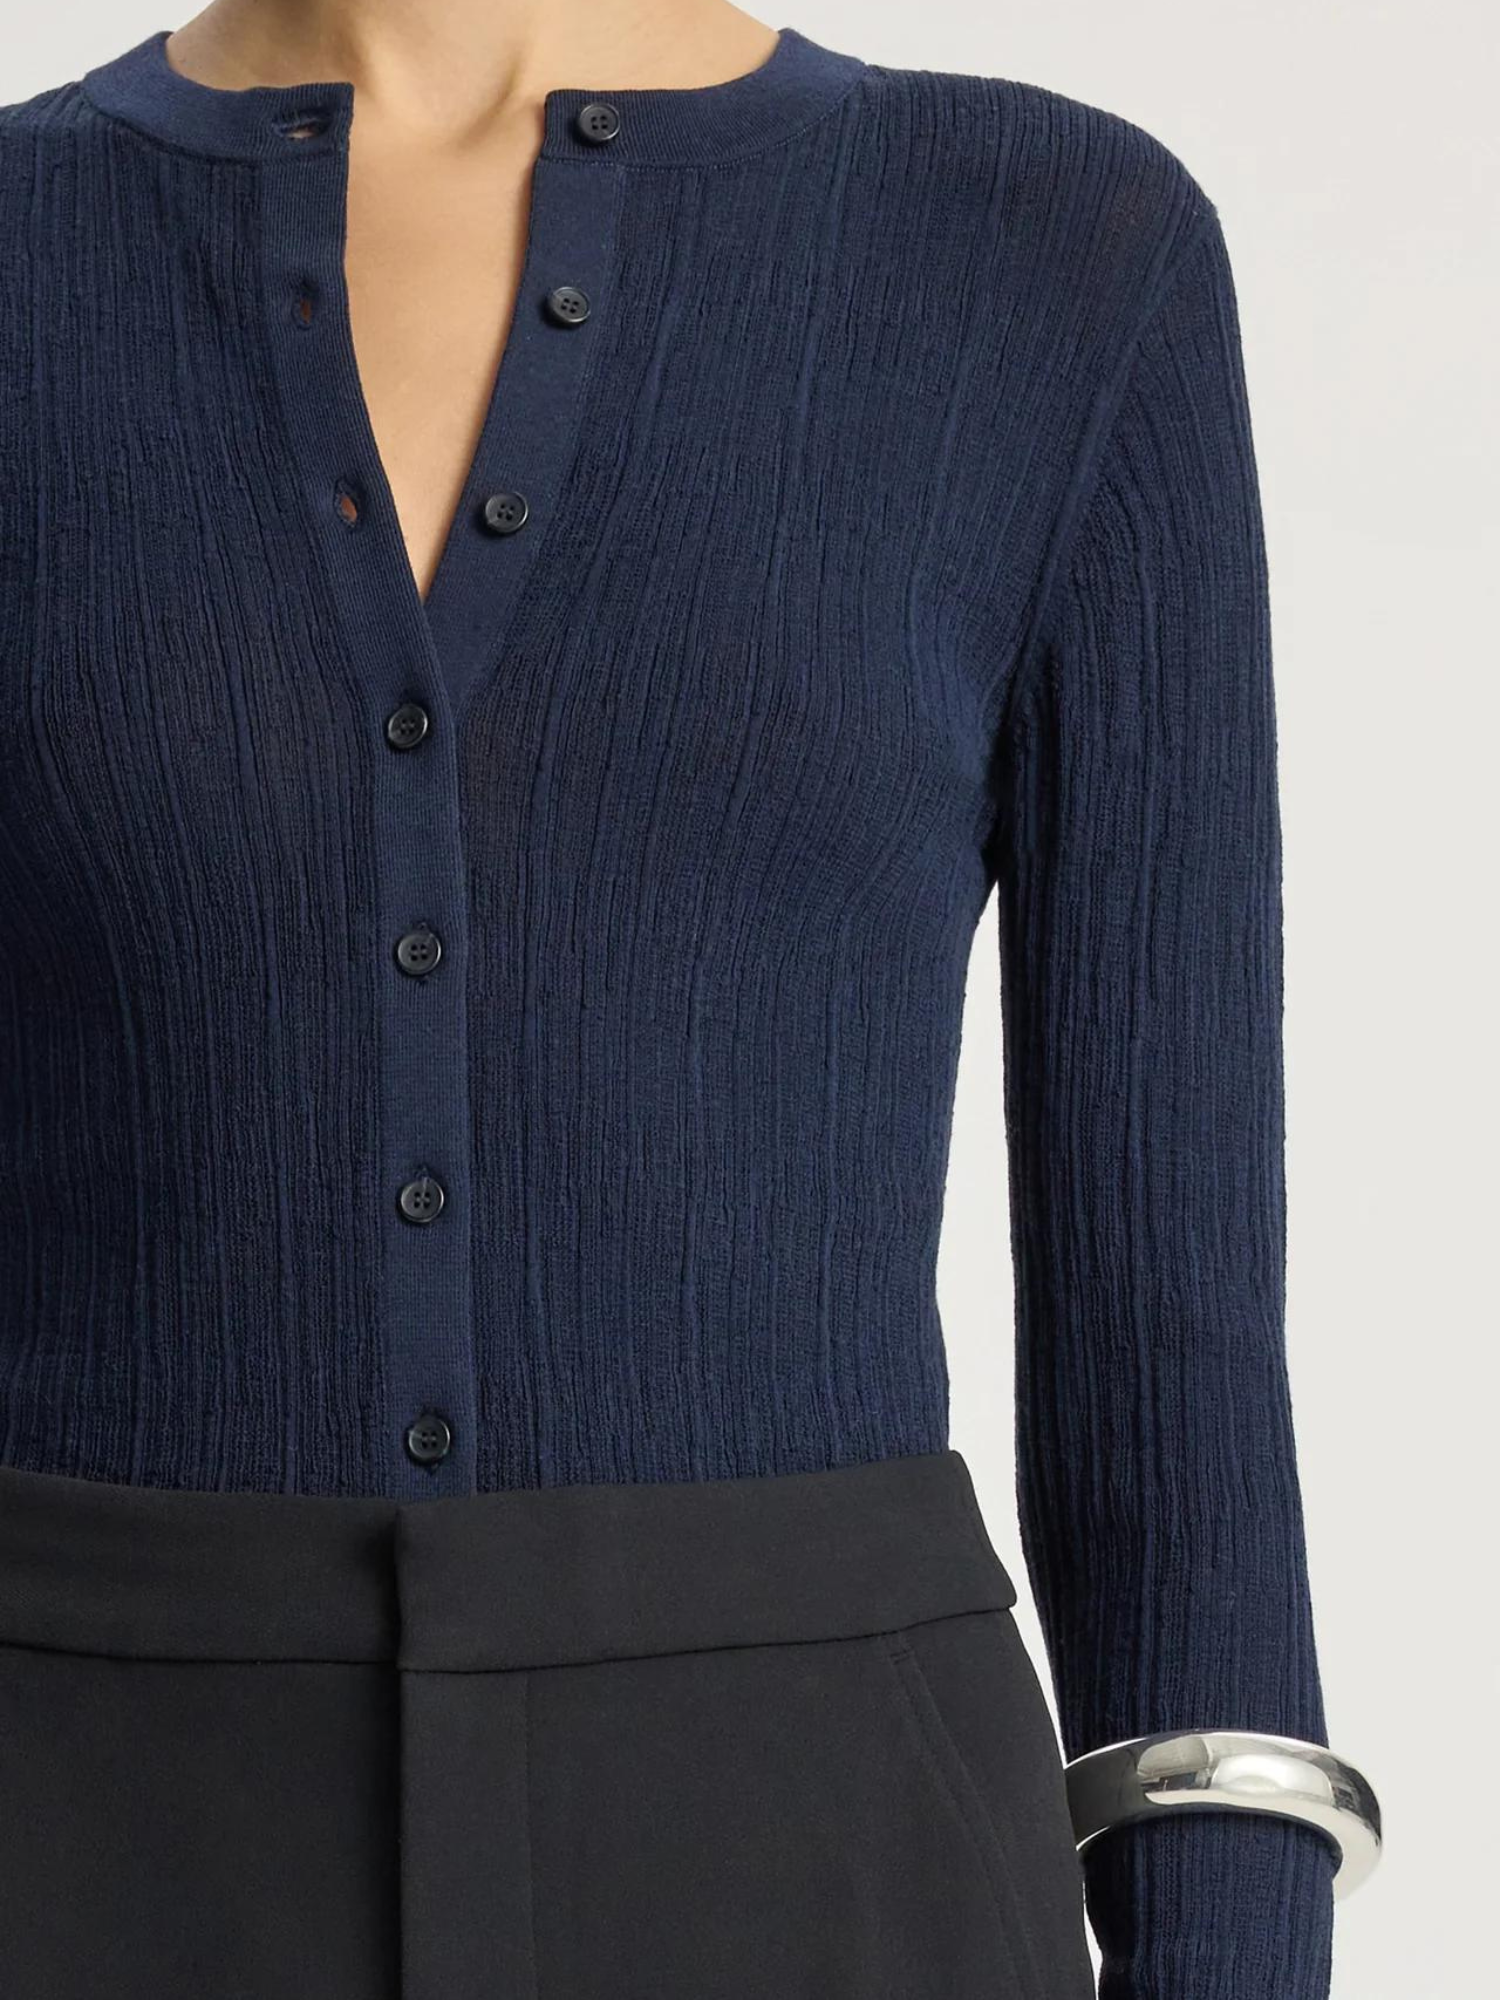 A.L.C. Fisher Cardigan in Navy